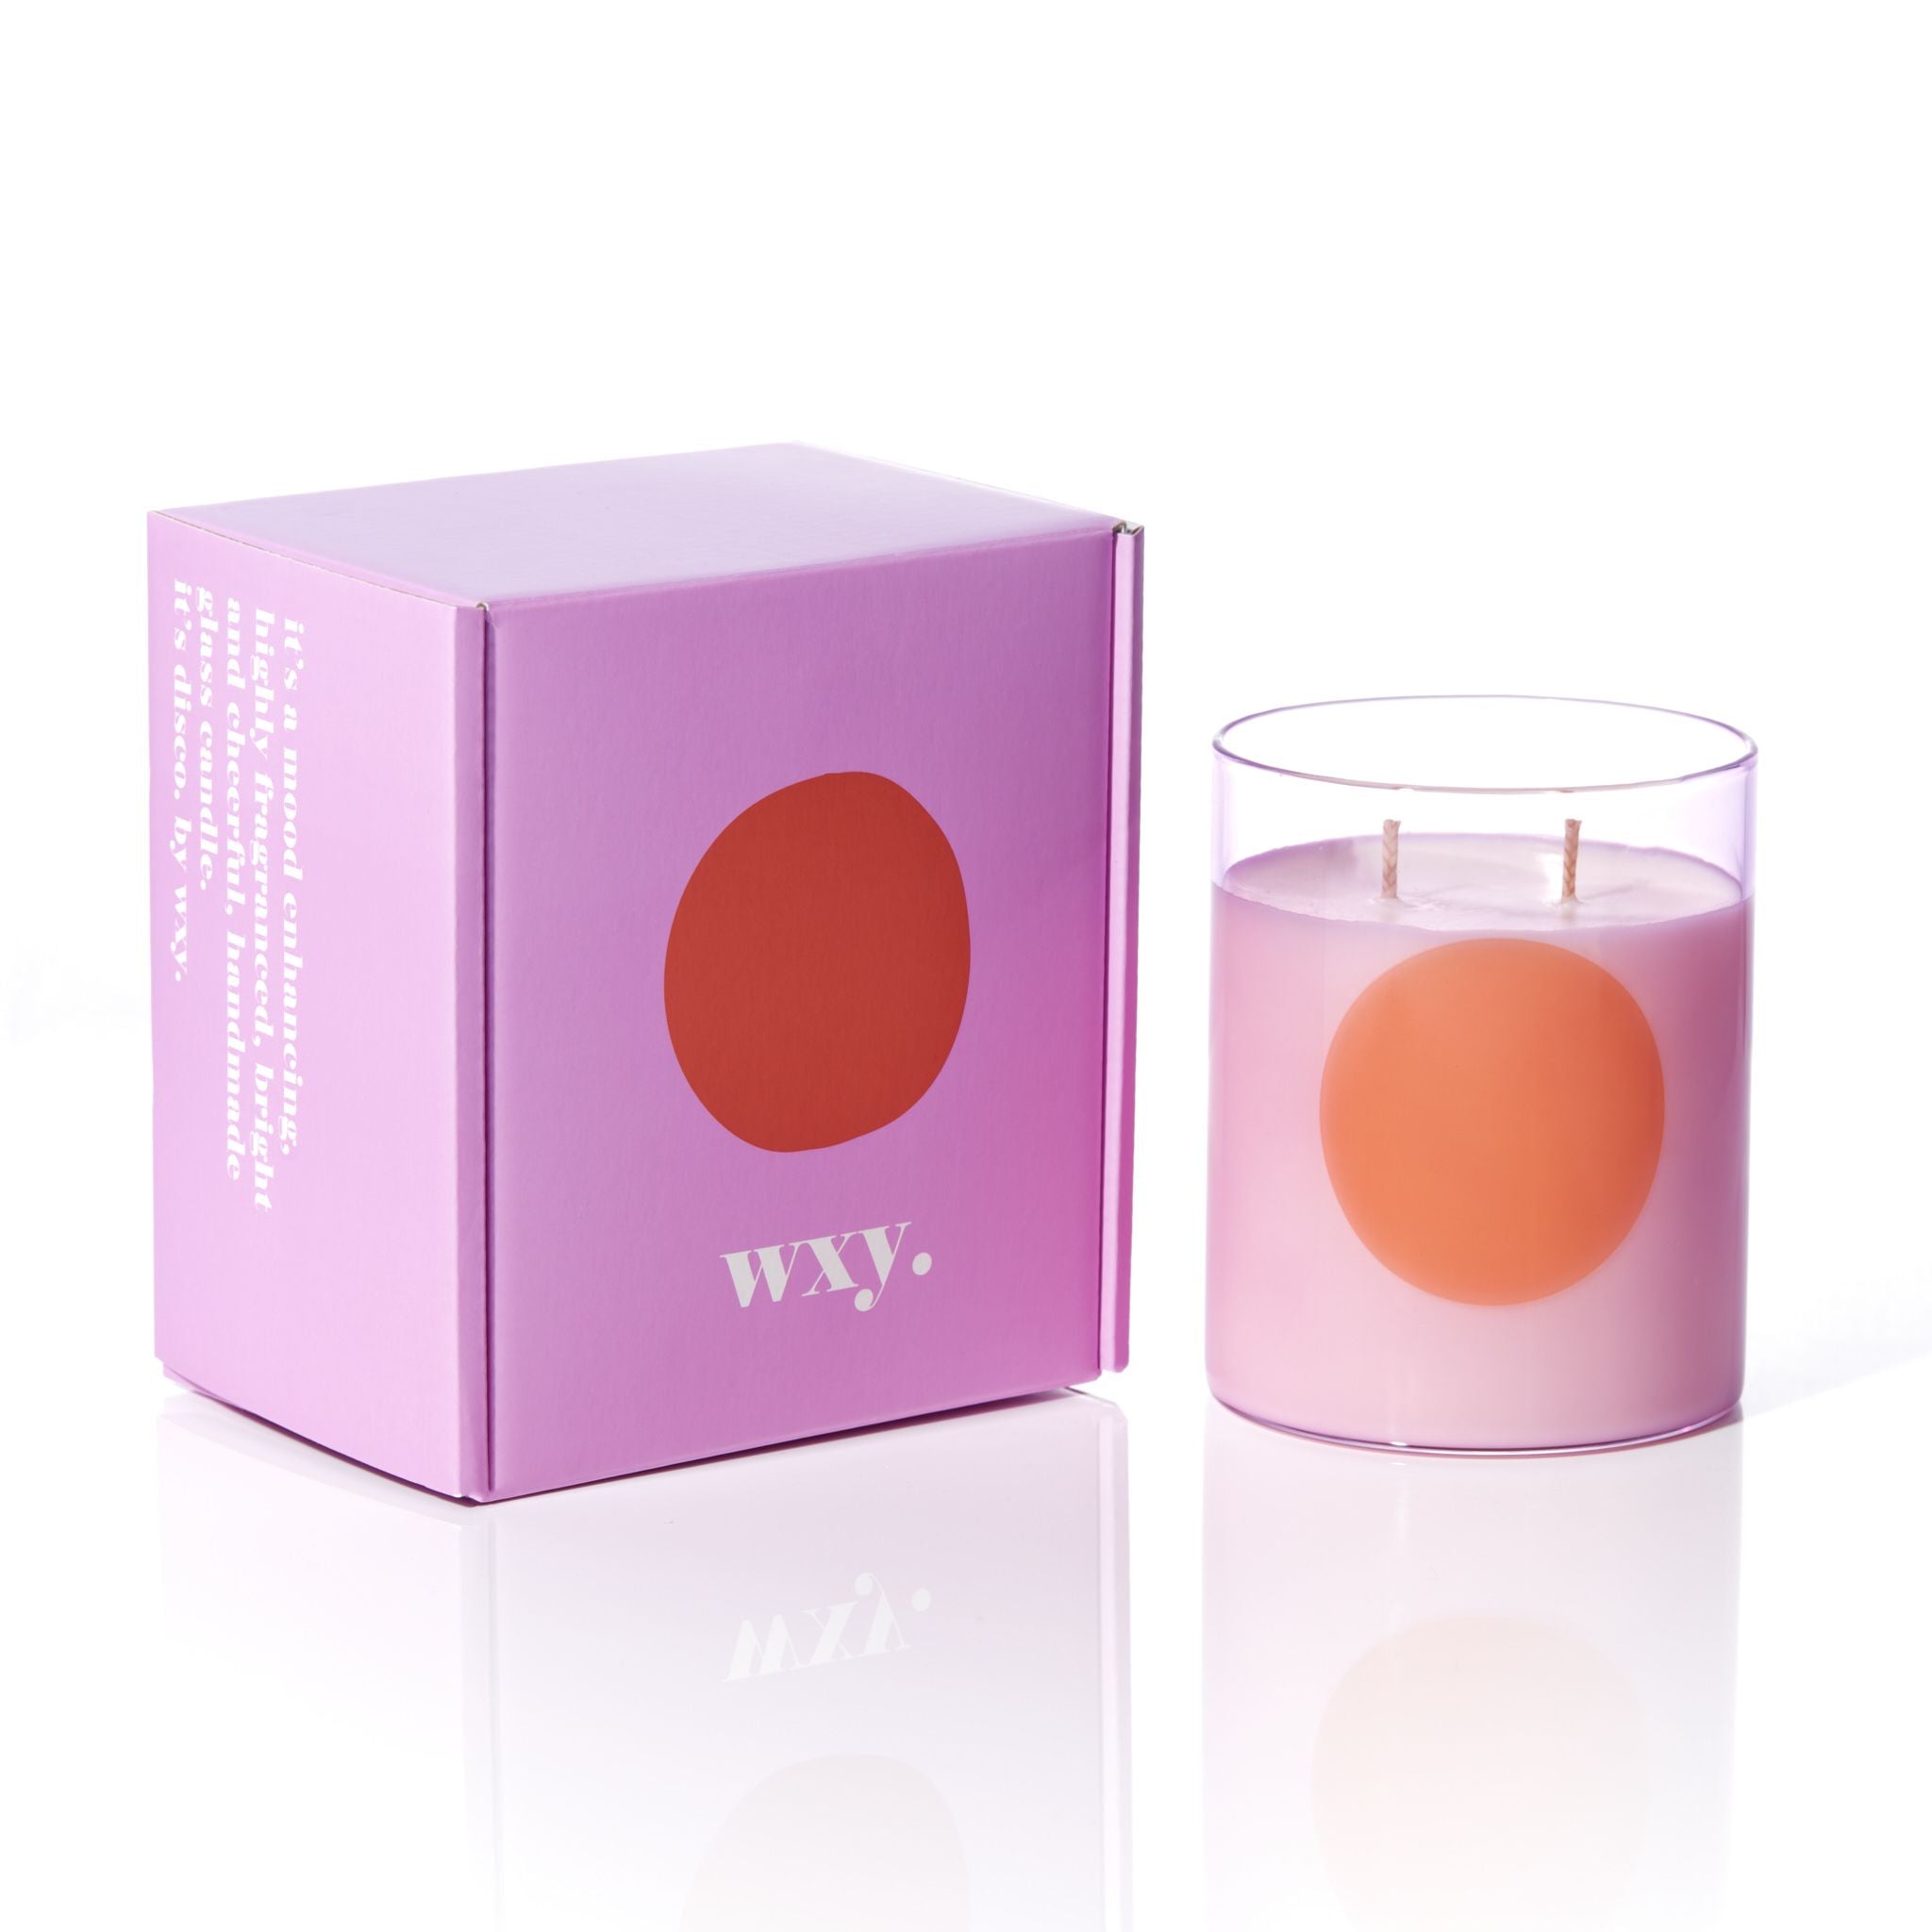 WXY Orris Root and Amber Disco Candle